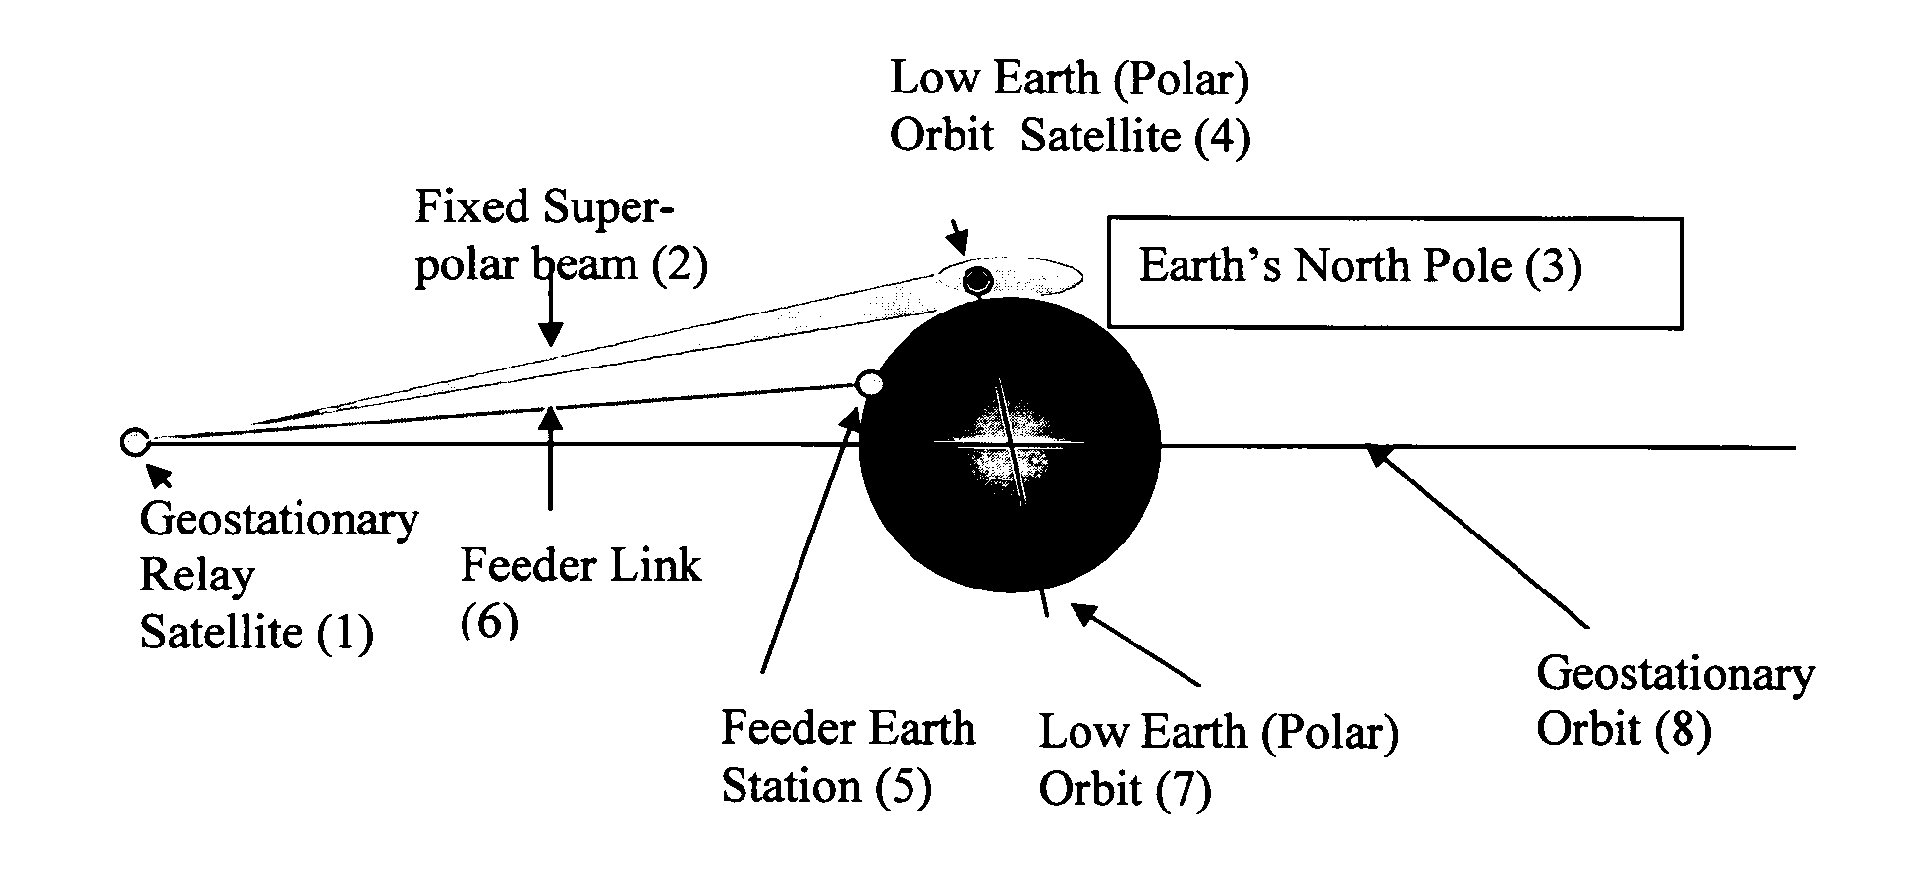 Virtual Polar Satellite Ground Station for Low Orbit Earth Observation Satellites Based on a Geostationary Satellite Pointing an Antenna Over an Earth Pole